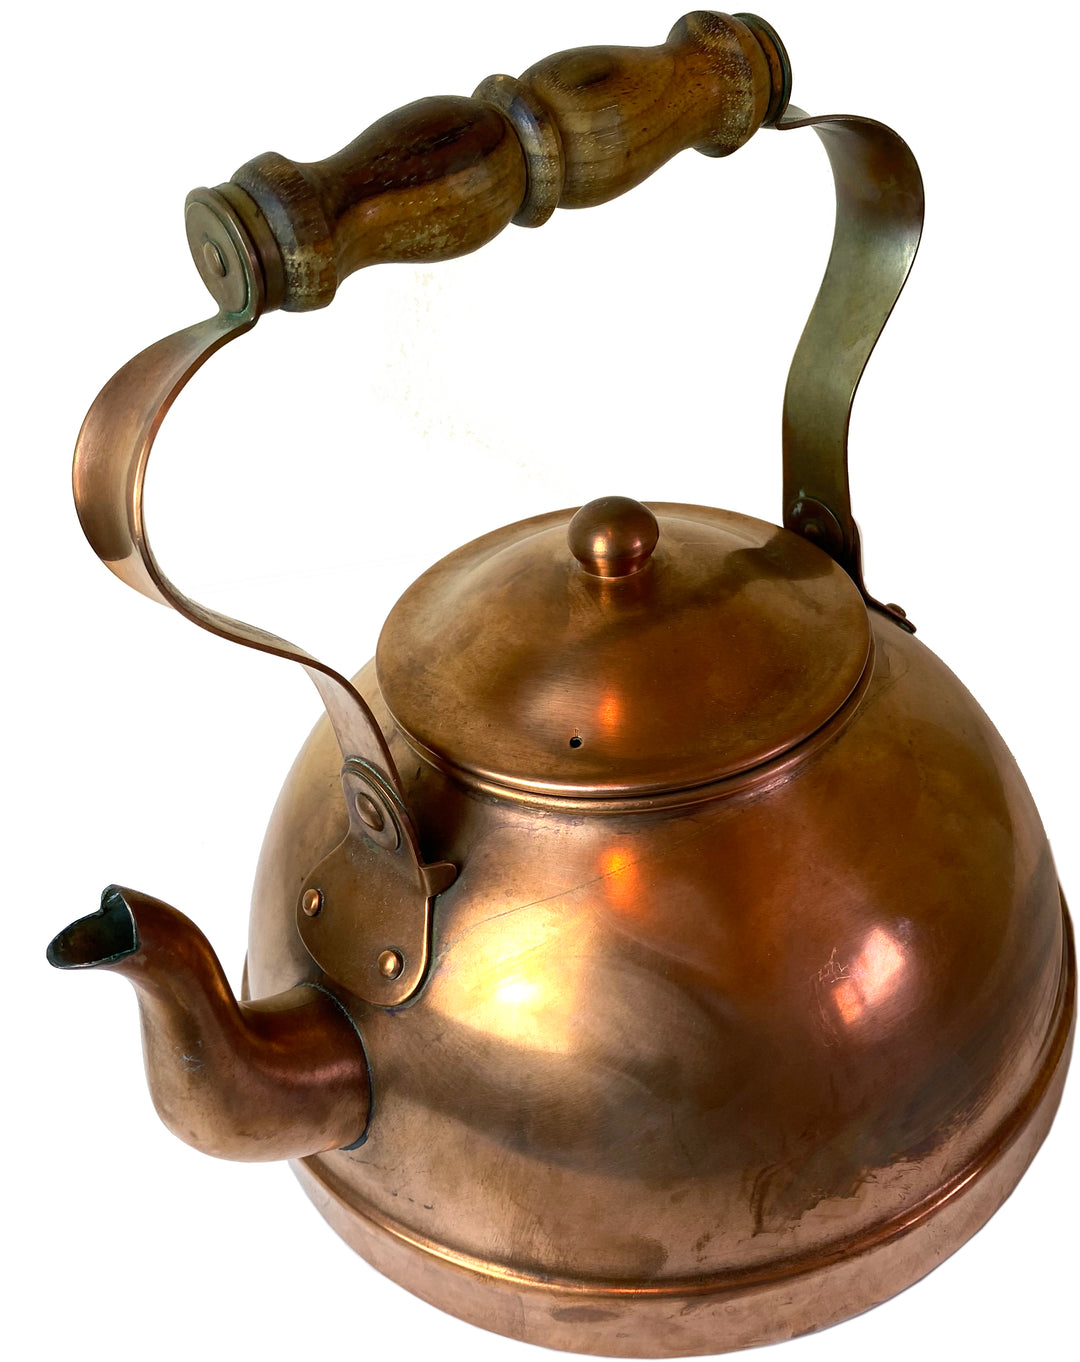 Vintage Tagus Copper Teapot with Wood Handle